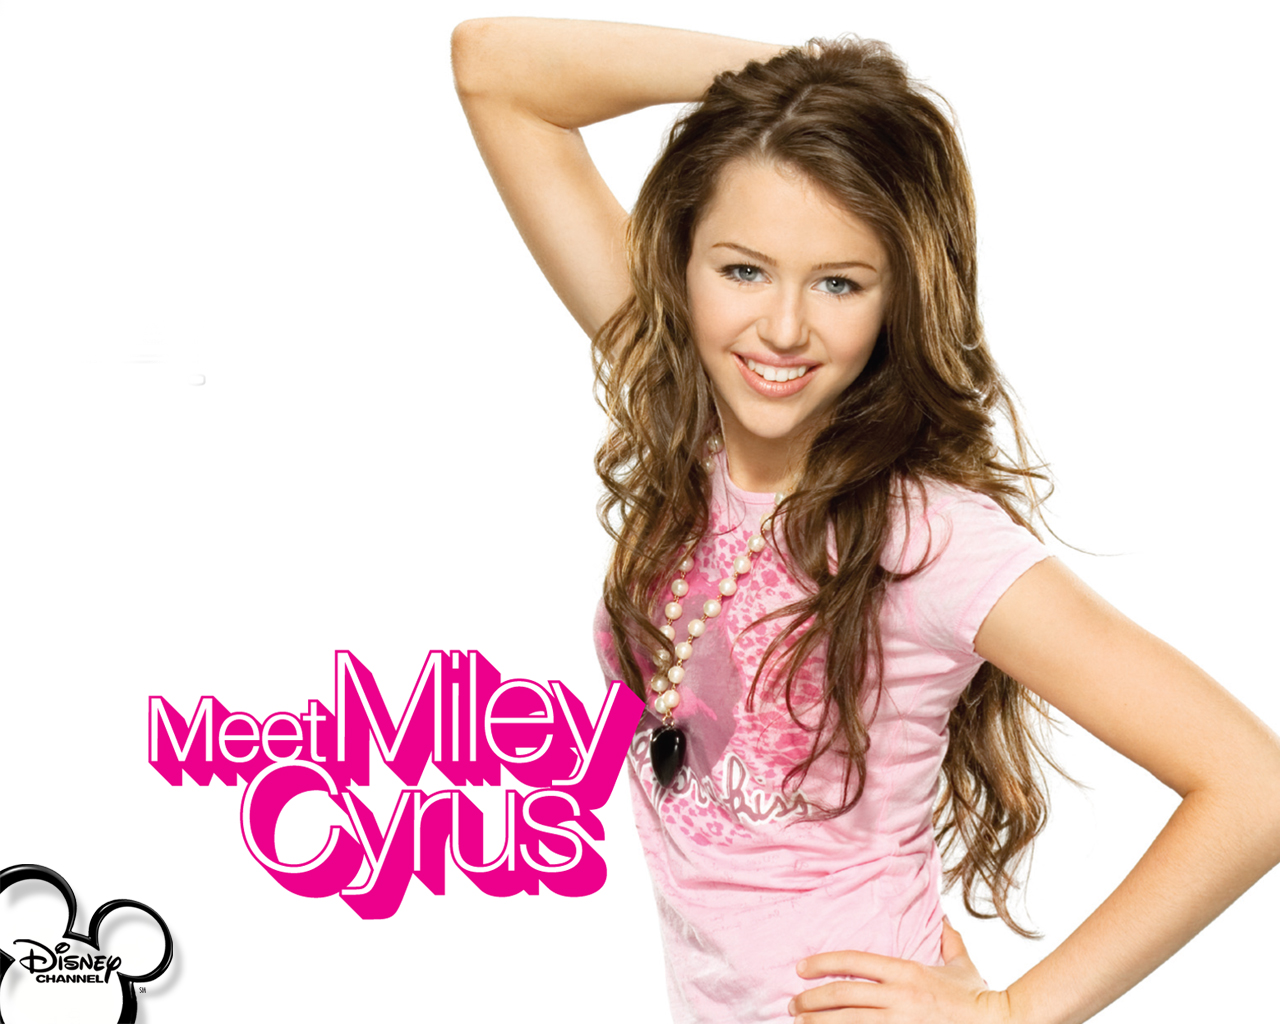 General photo of Miley Cyrus